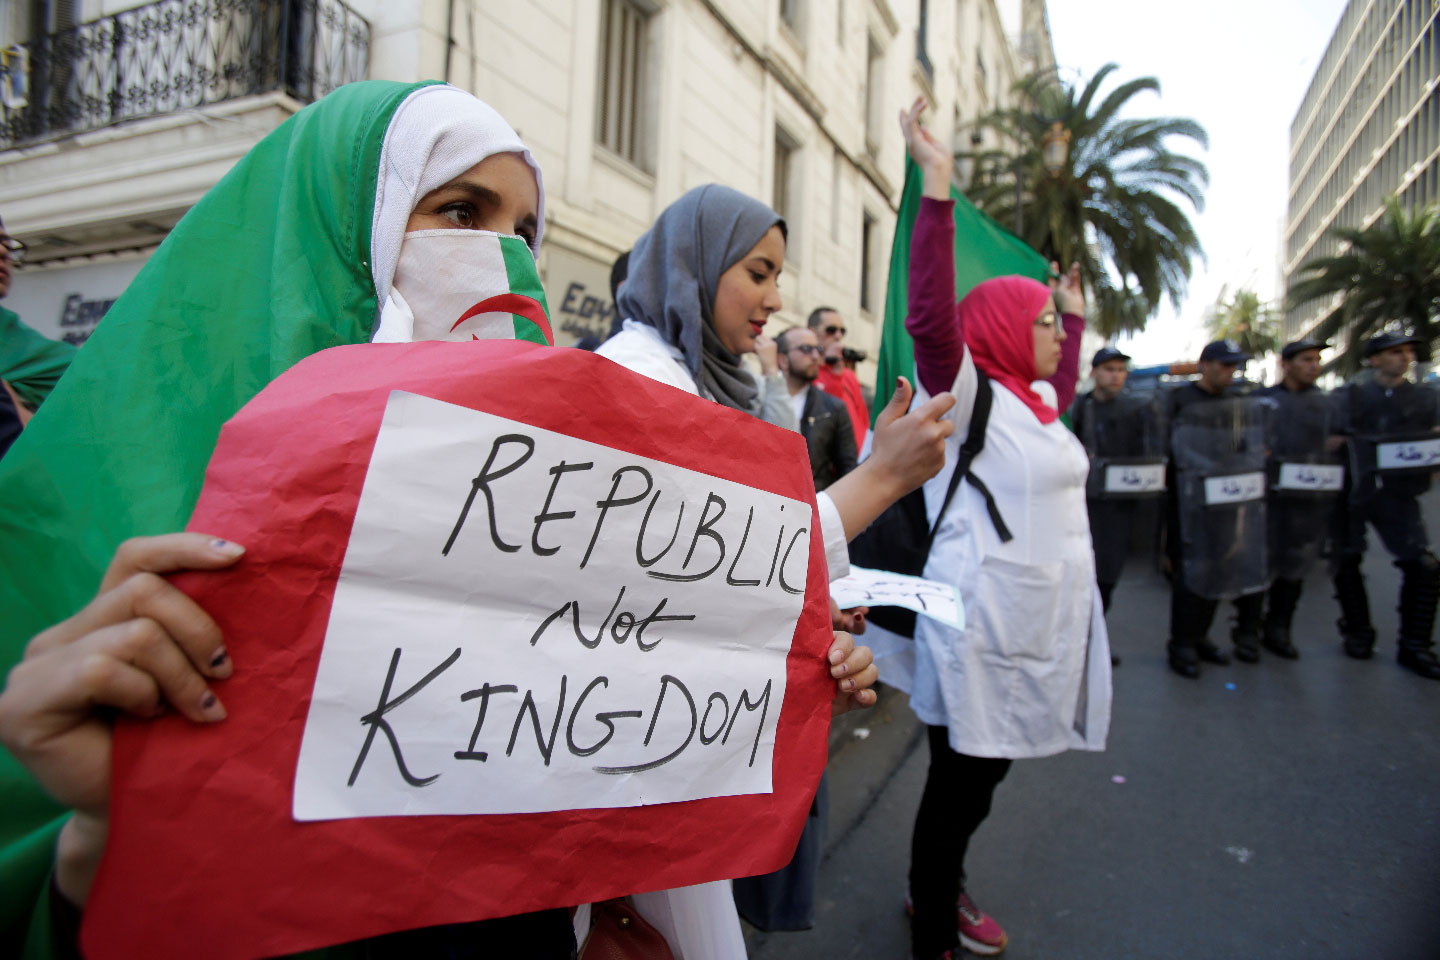 A demonstrator carries a sign as teachers and students take part in a protest demanding immediate political change in Algiers, Algeria March 13, 2019. 